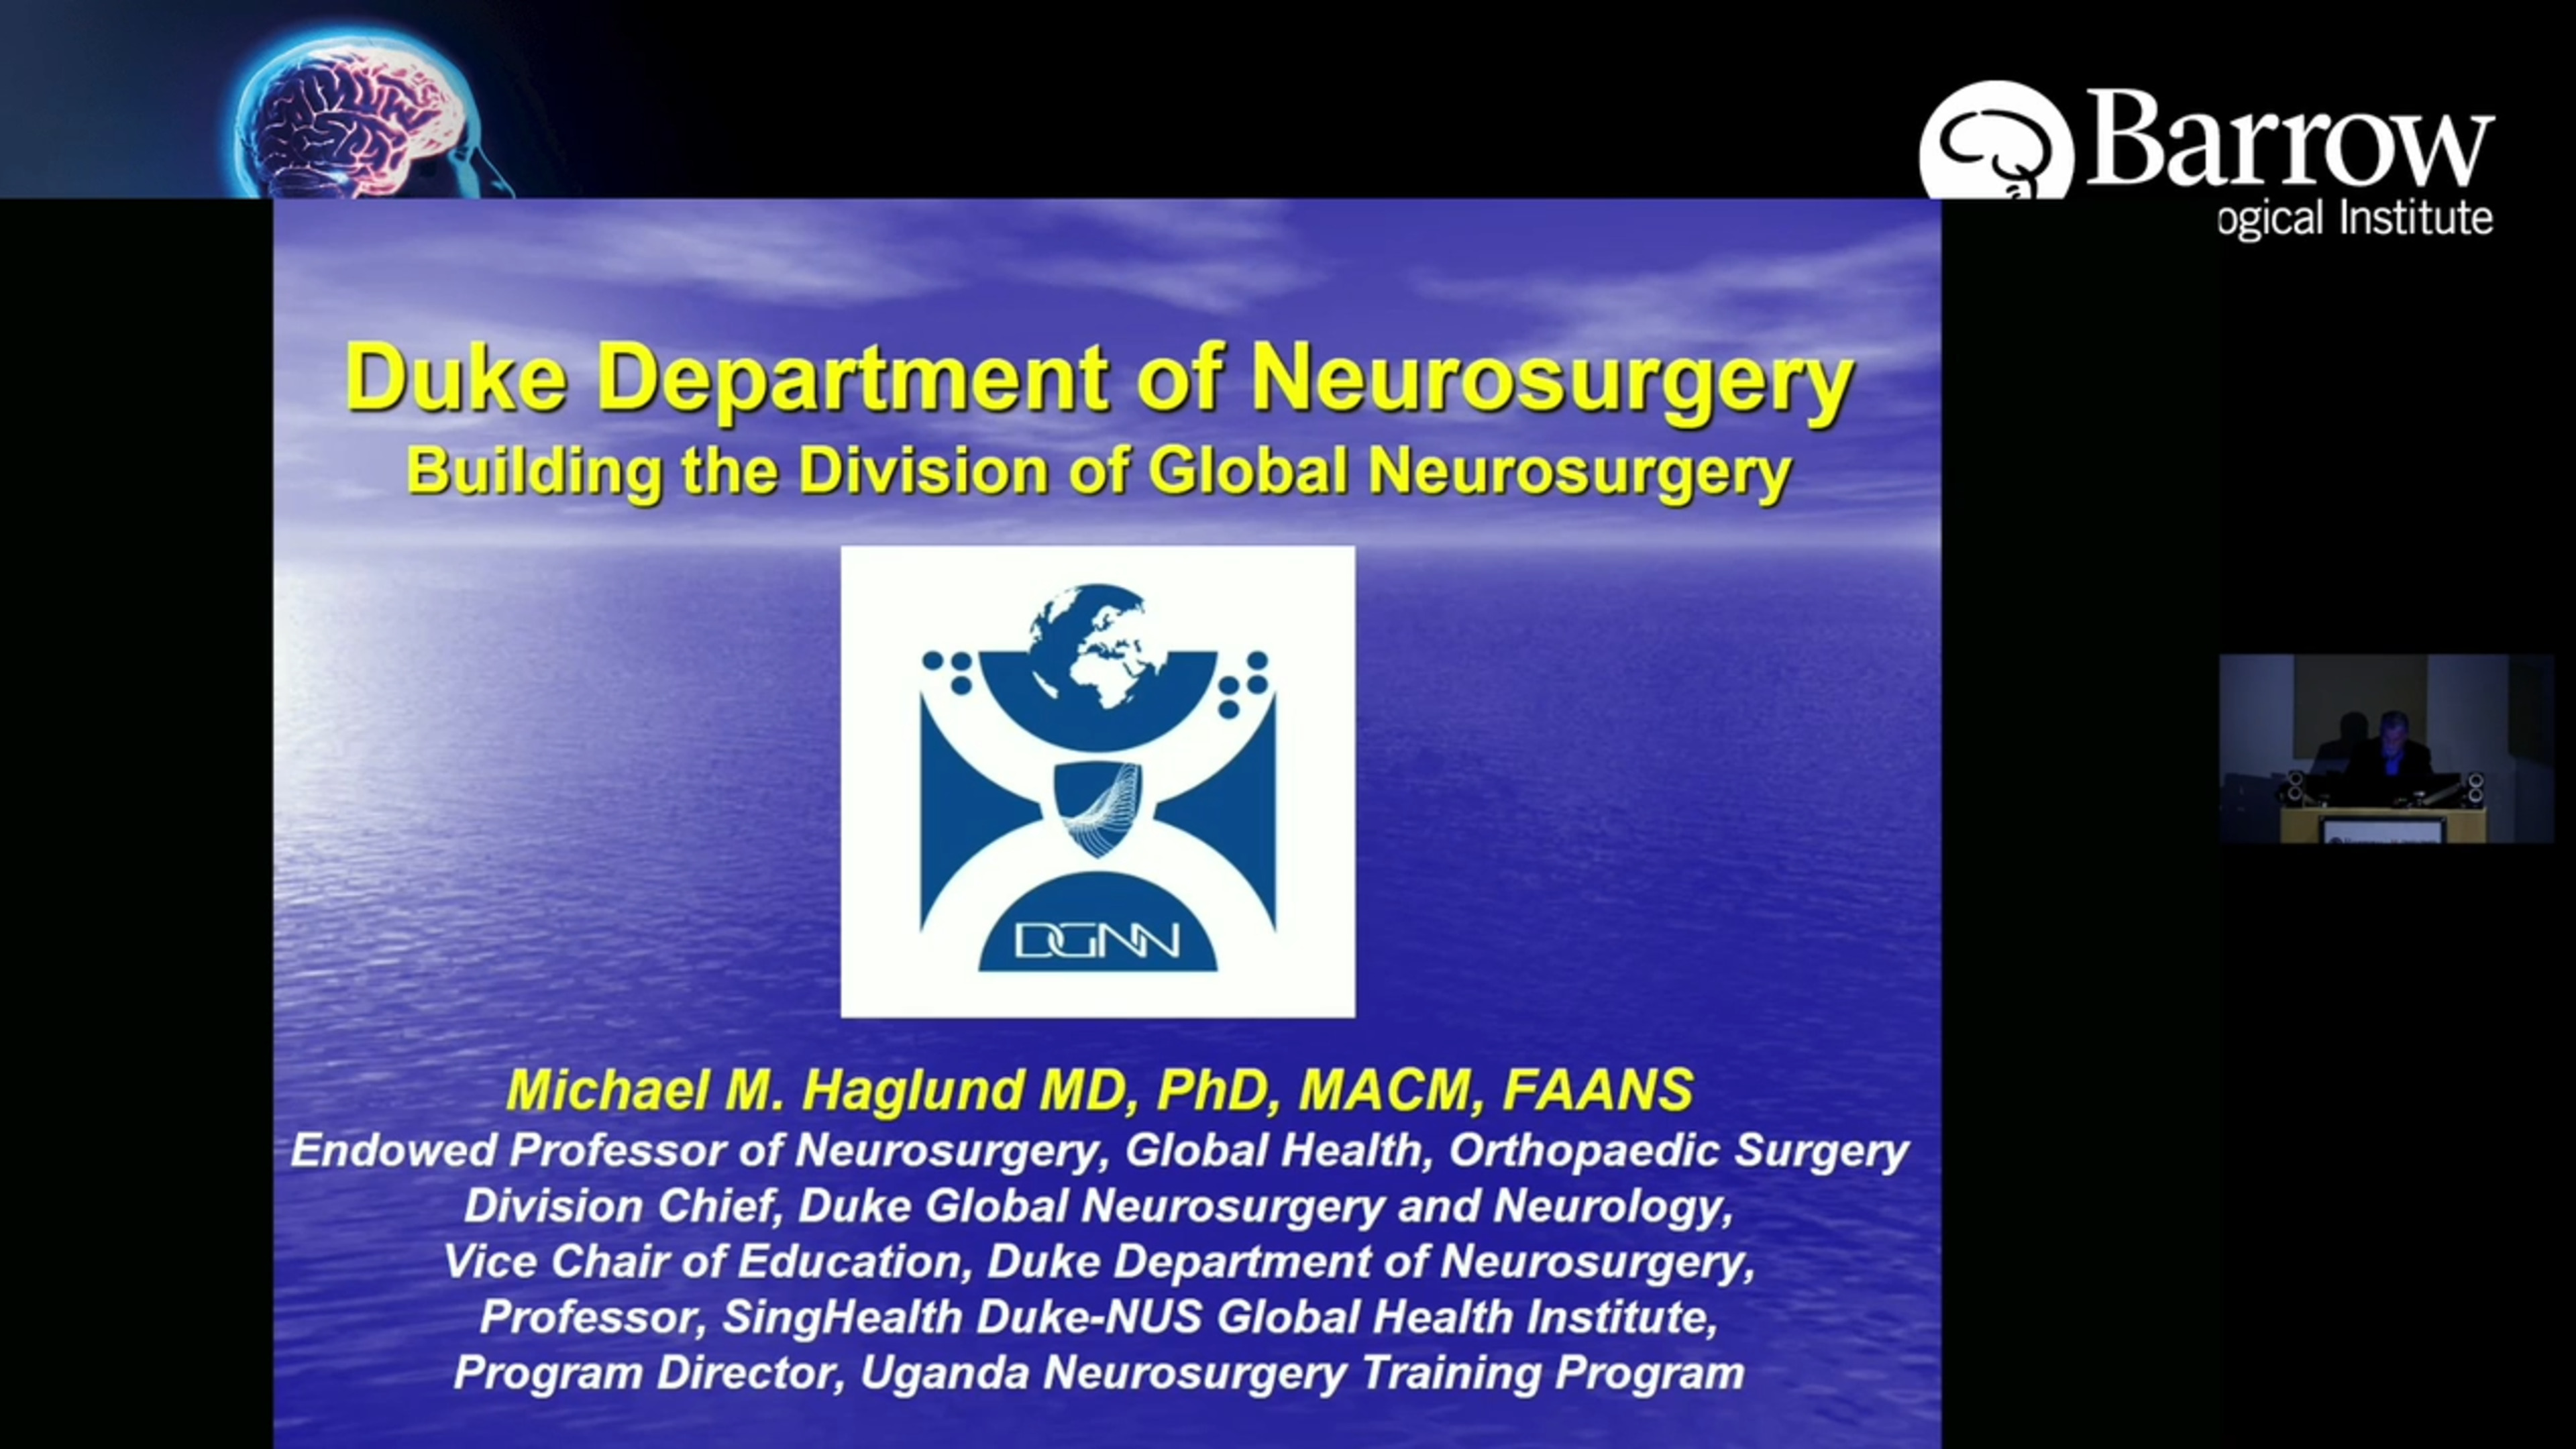 Building a Division of Global Neurosurgery